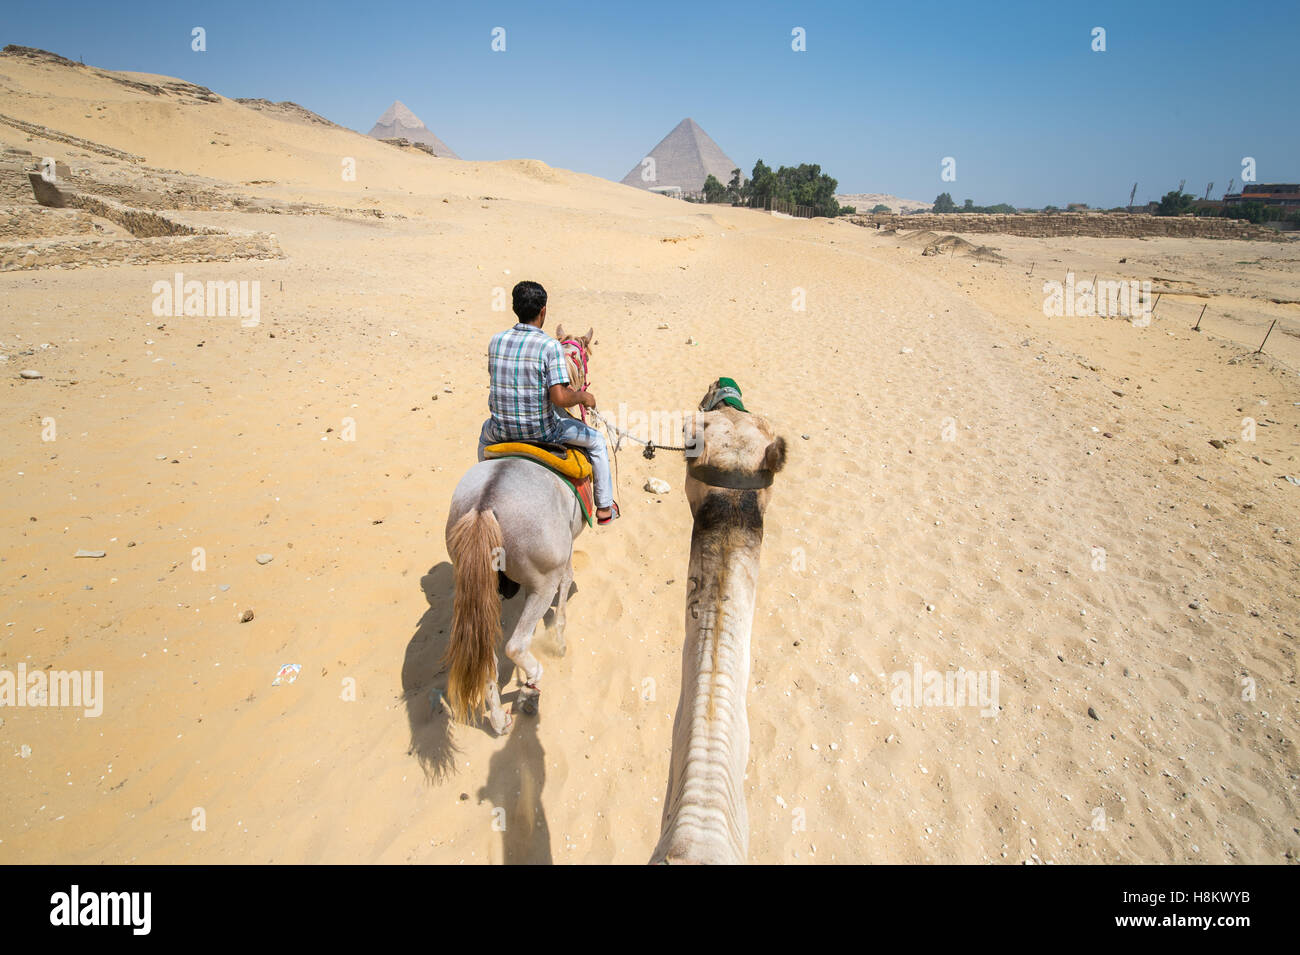 Cairo, Egypt Camel driver on horseback and a tourist riding a camel walking through the desert with the Great Pyramids of Giza i Stock Photo